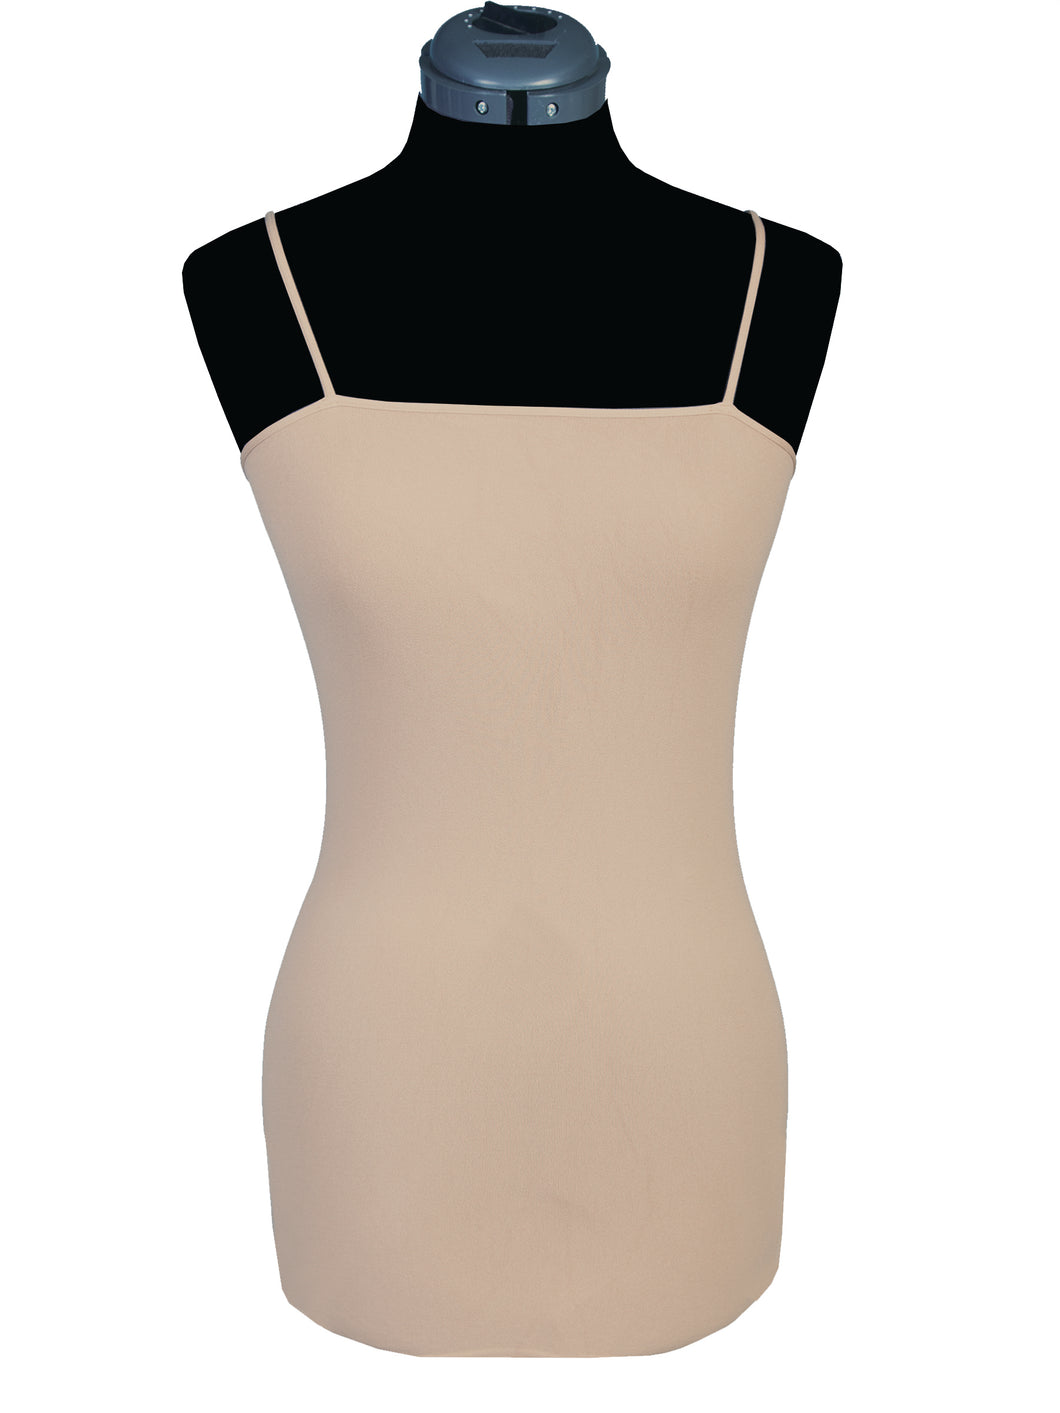 SCULLY- CAMISOLE BLACK BEIGE OR RED